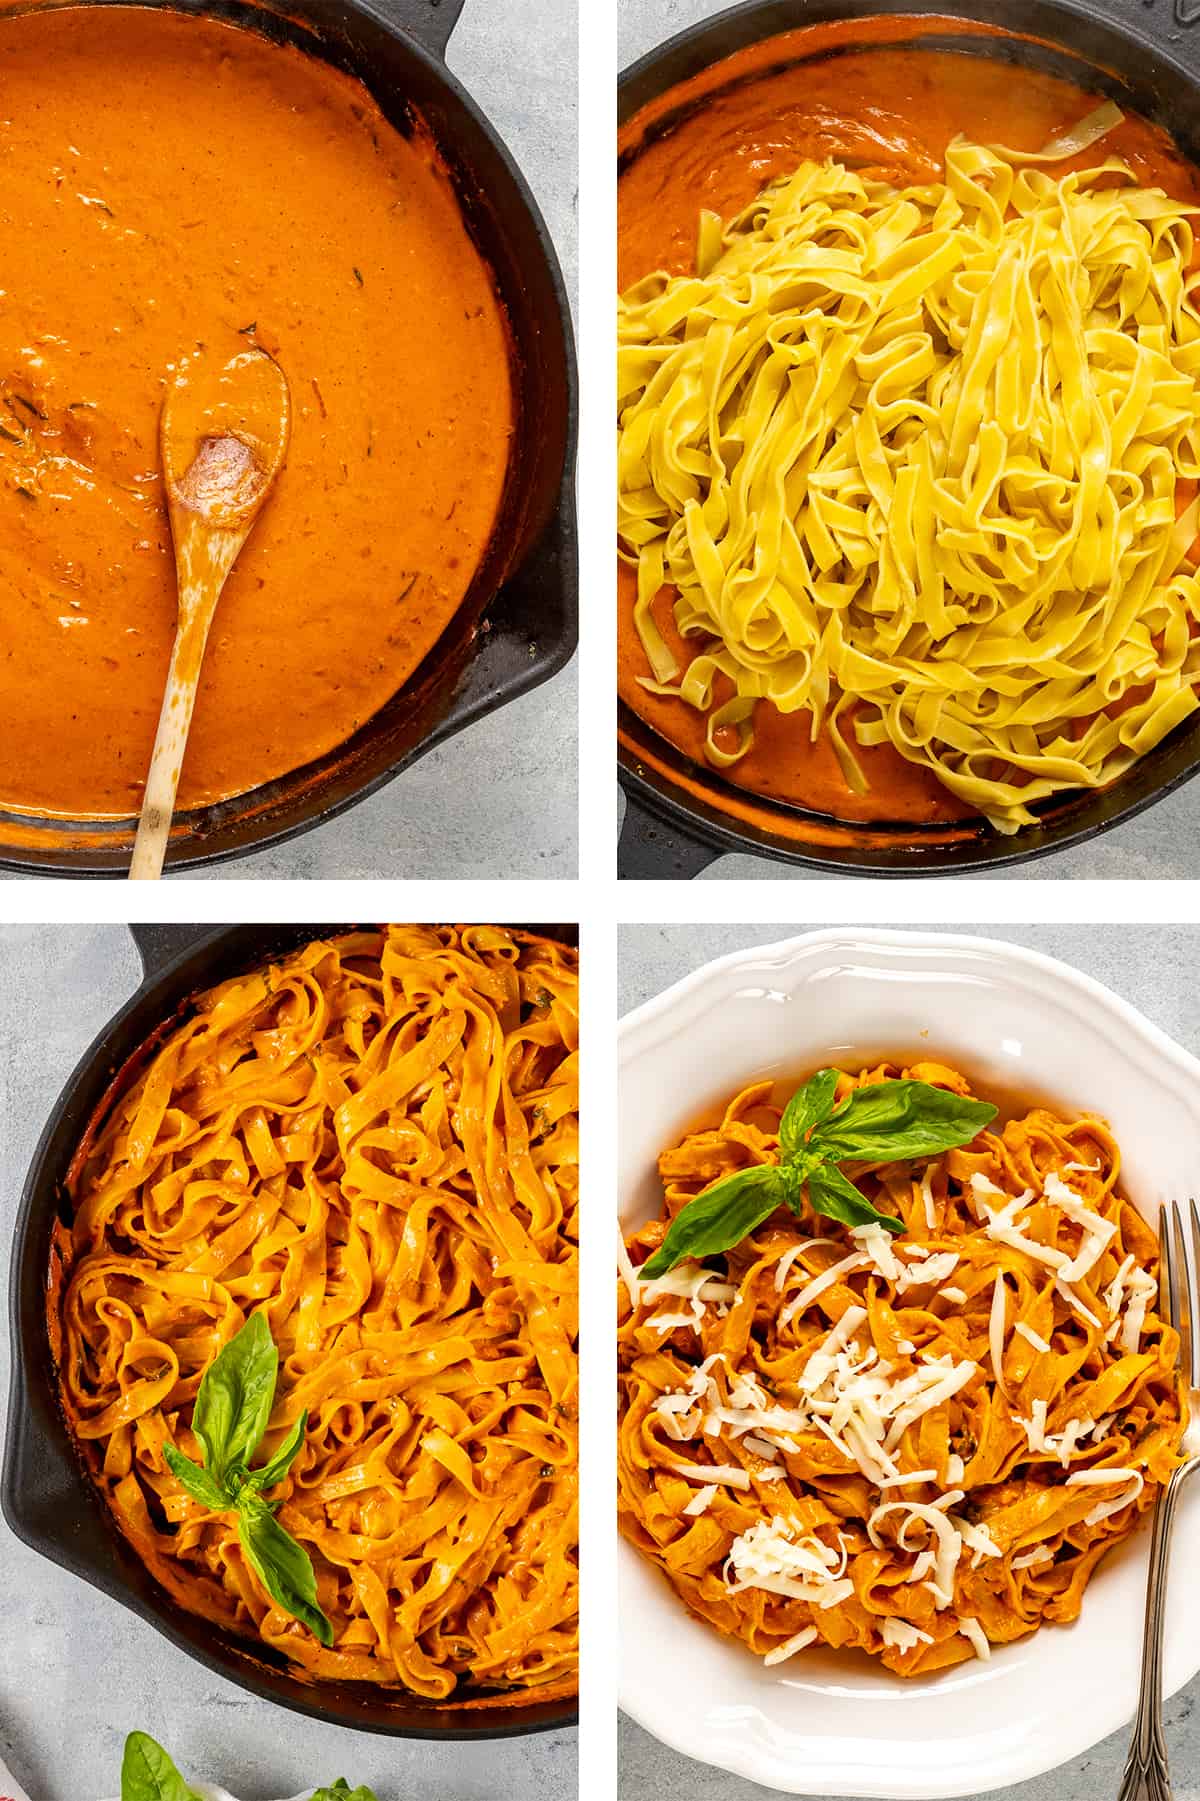 A collage of four pictures showing how to make tomato cream sauce and how to combine the sauce with pasta.